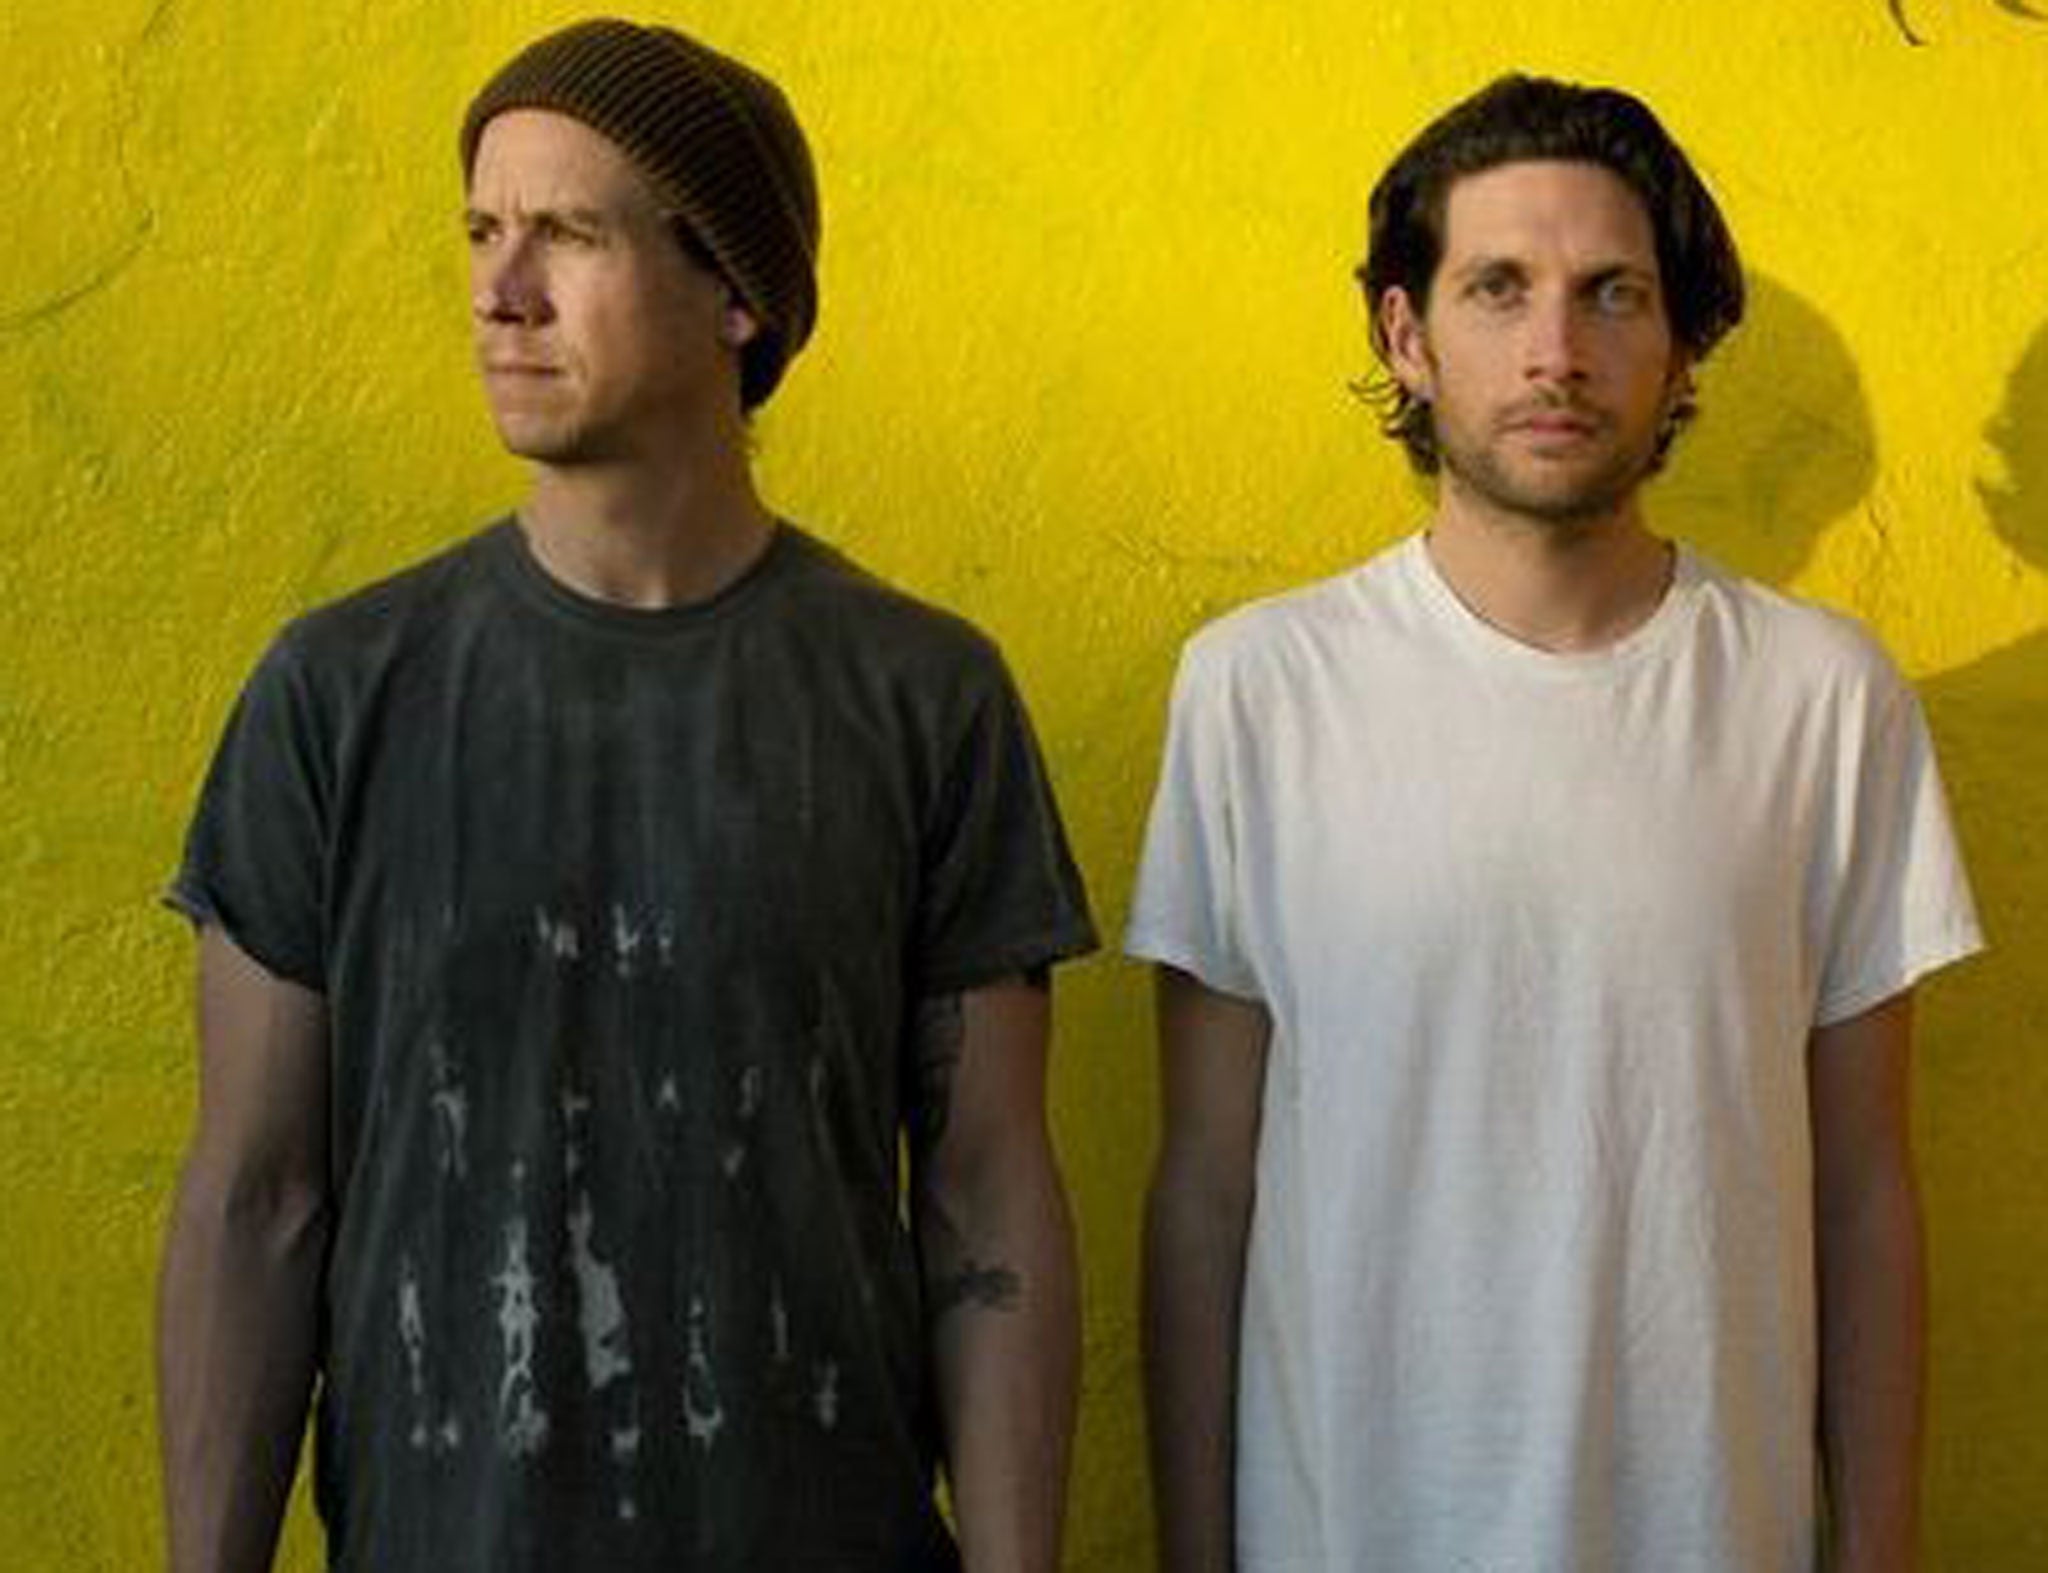 No Age have unleashed a single of heavy percussion, buzzing guitar lines and shouted vocals